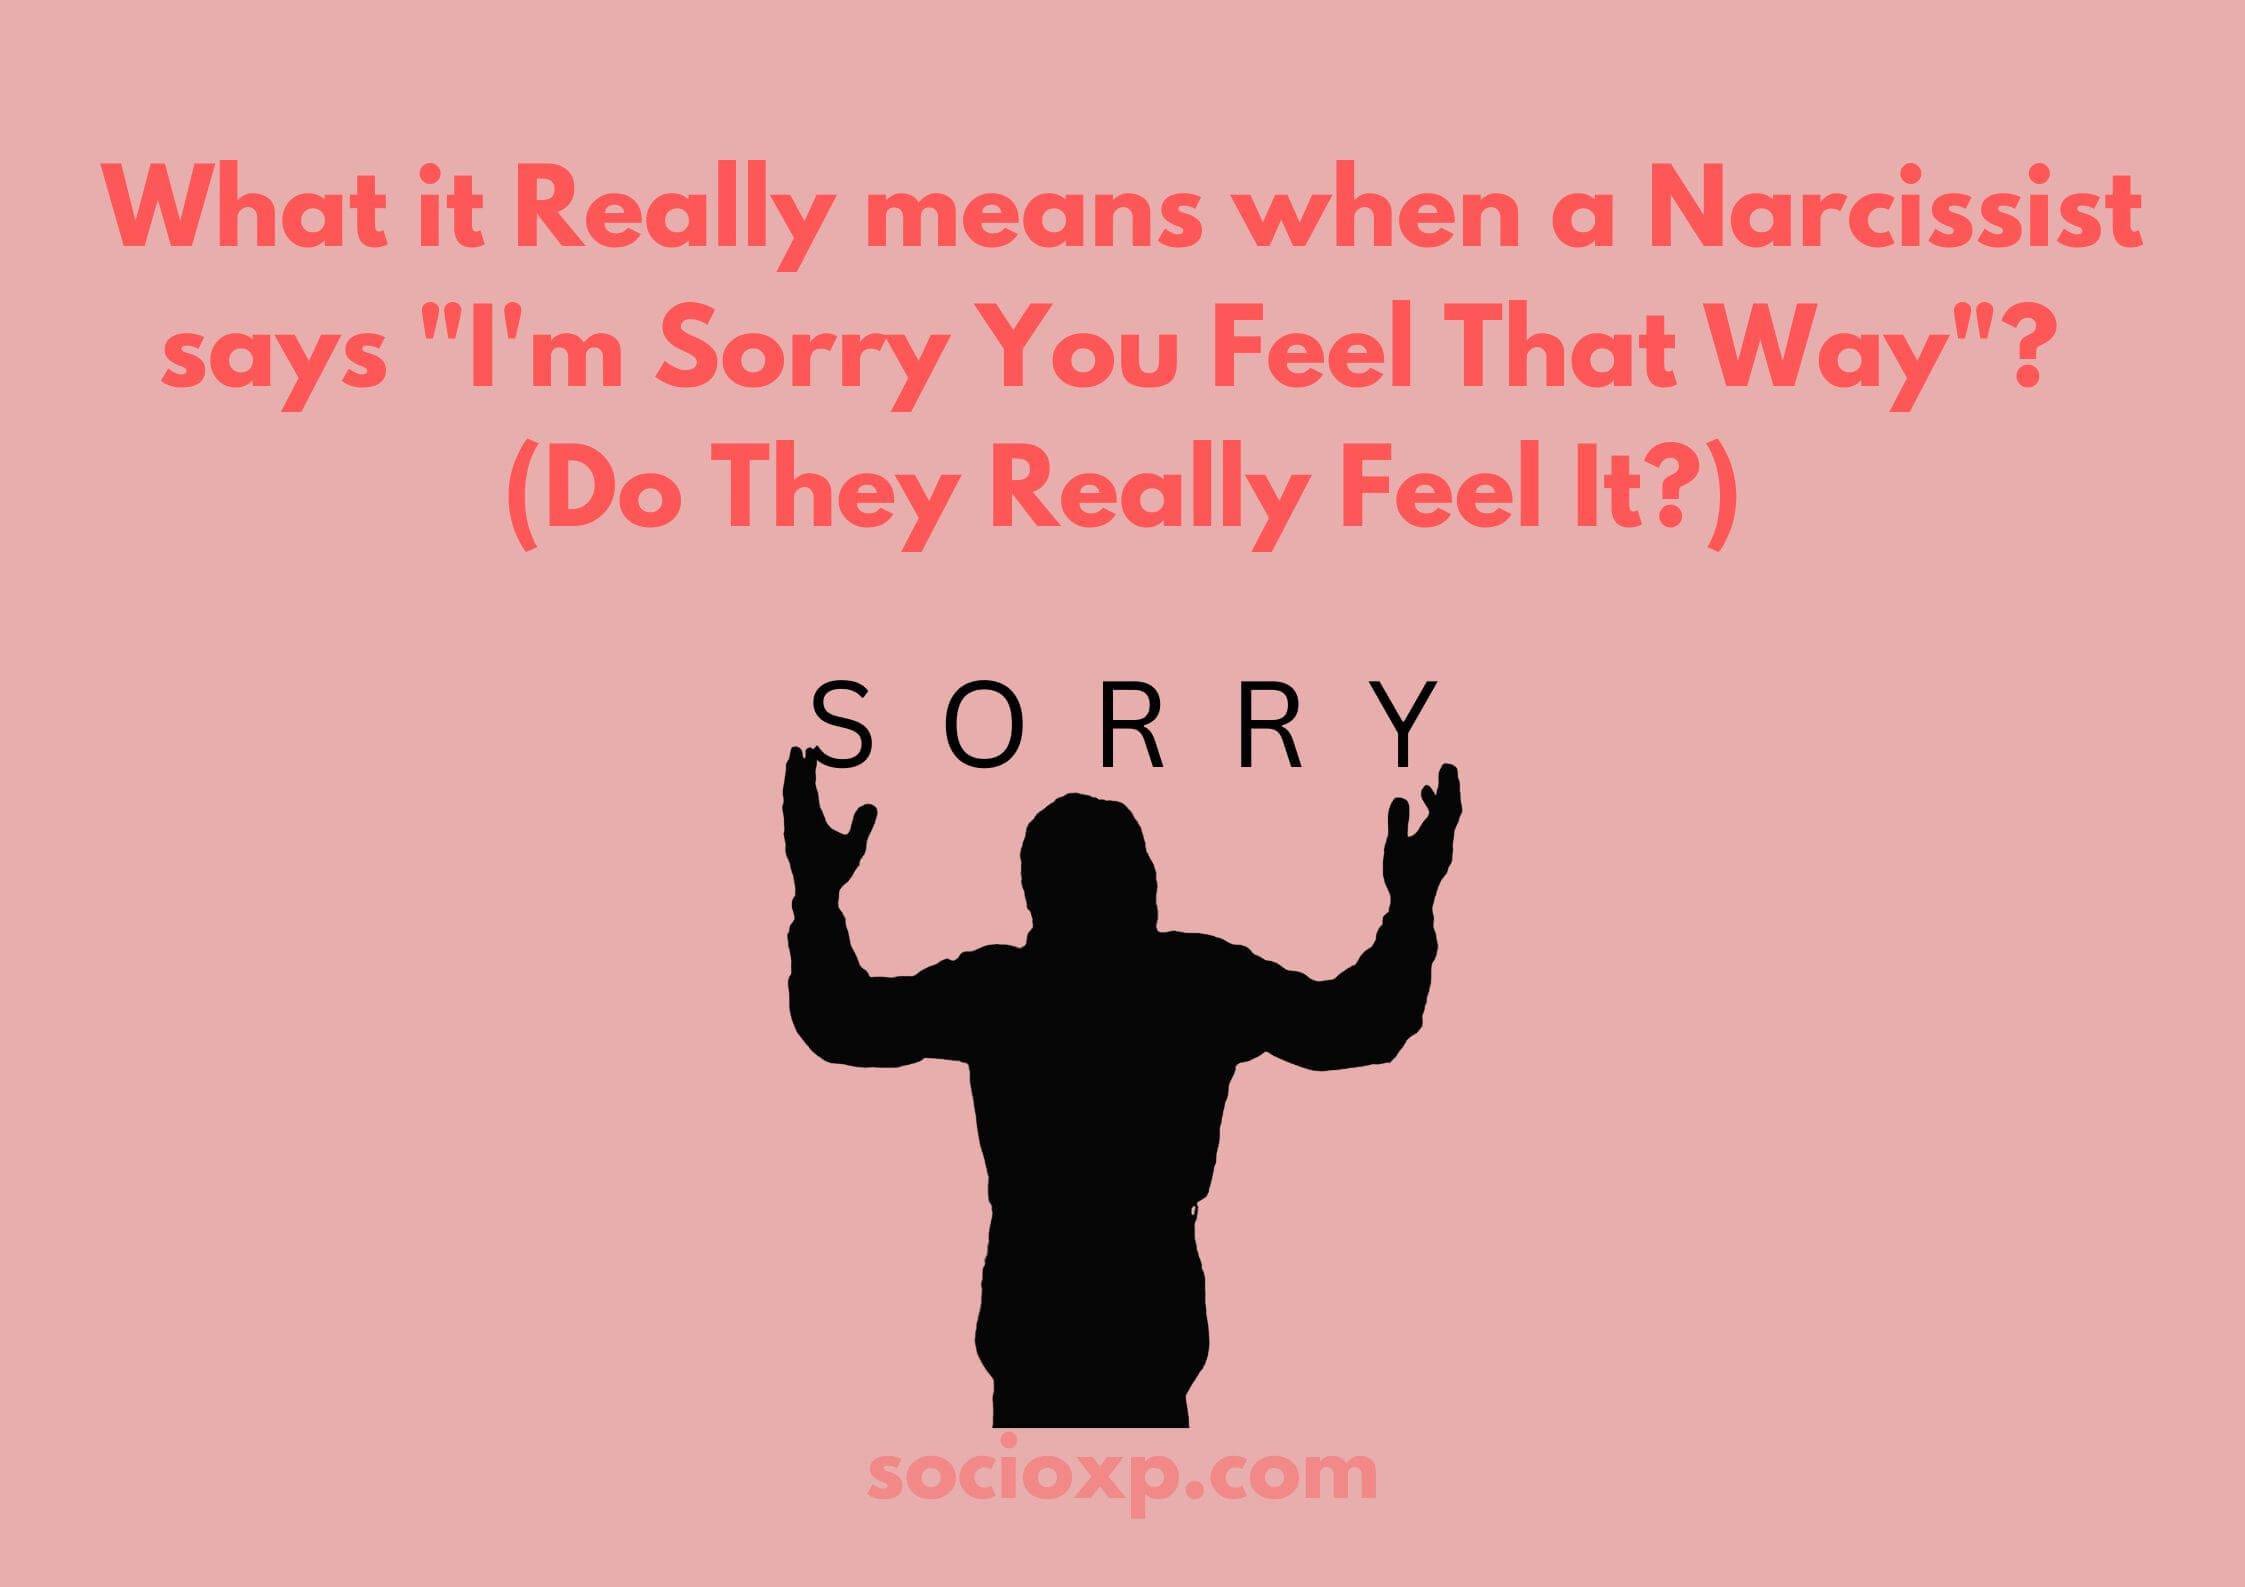 What It Really Means When a Narcissist Says "I'm Sorry You Feel That Way"? (Do They Really Feel It?)